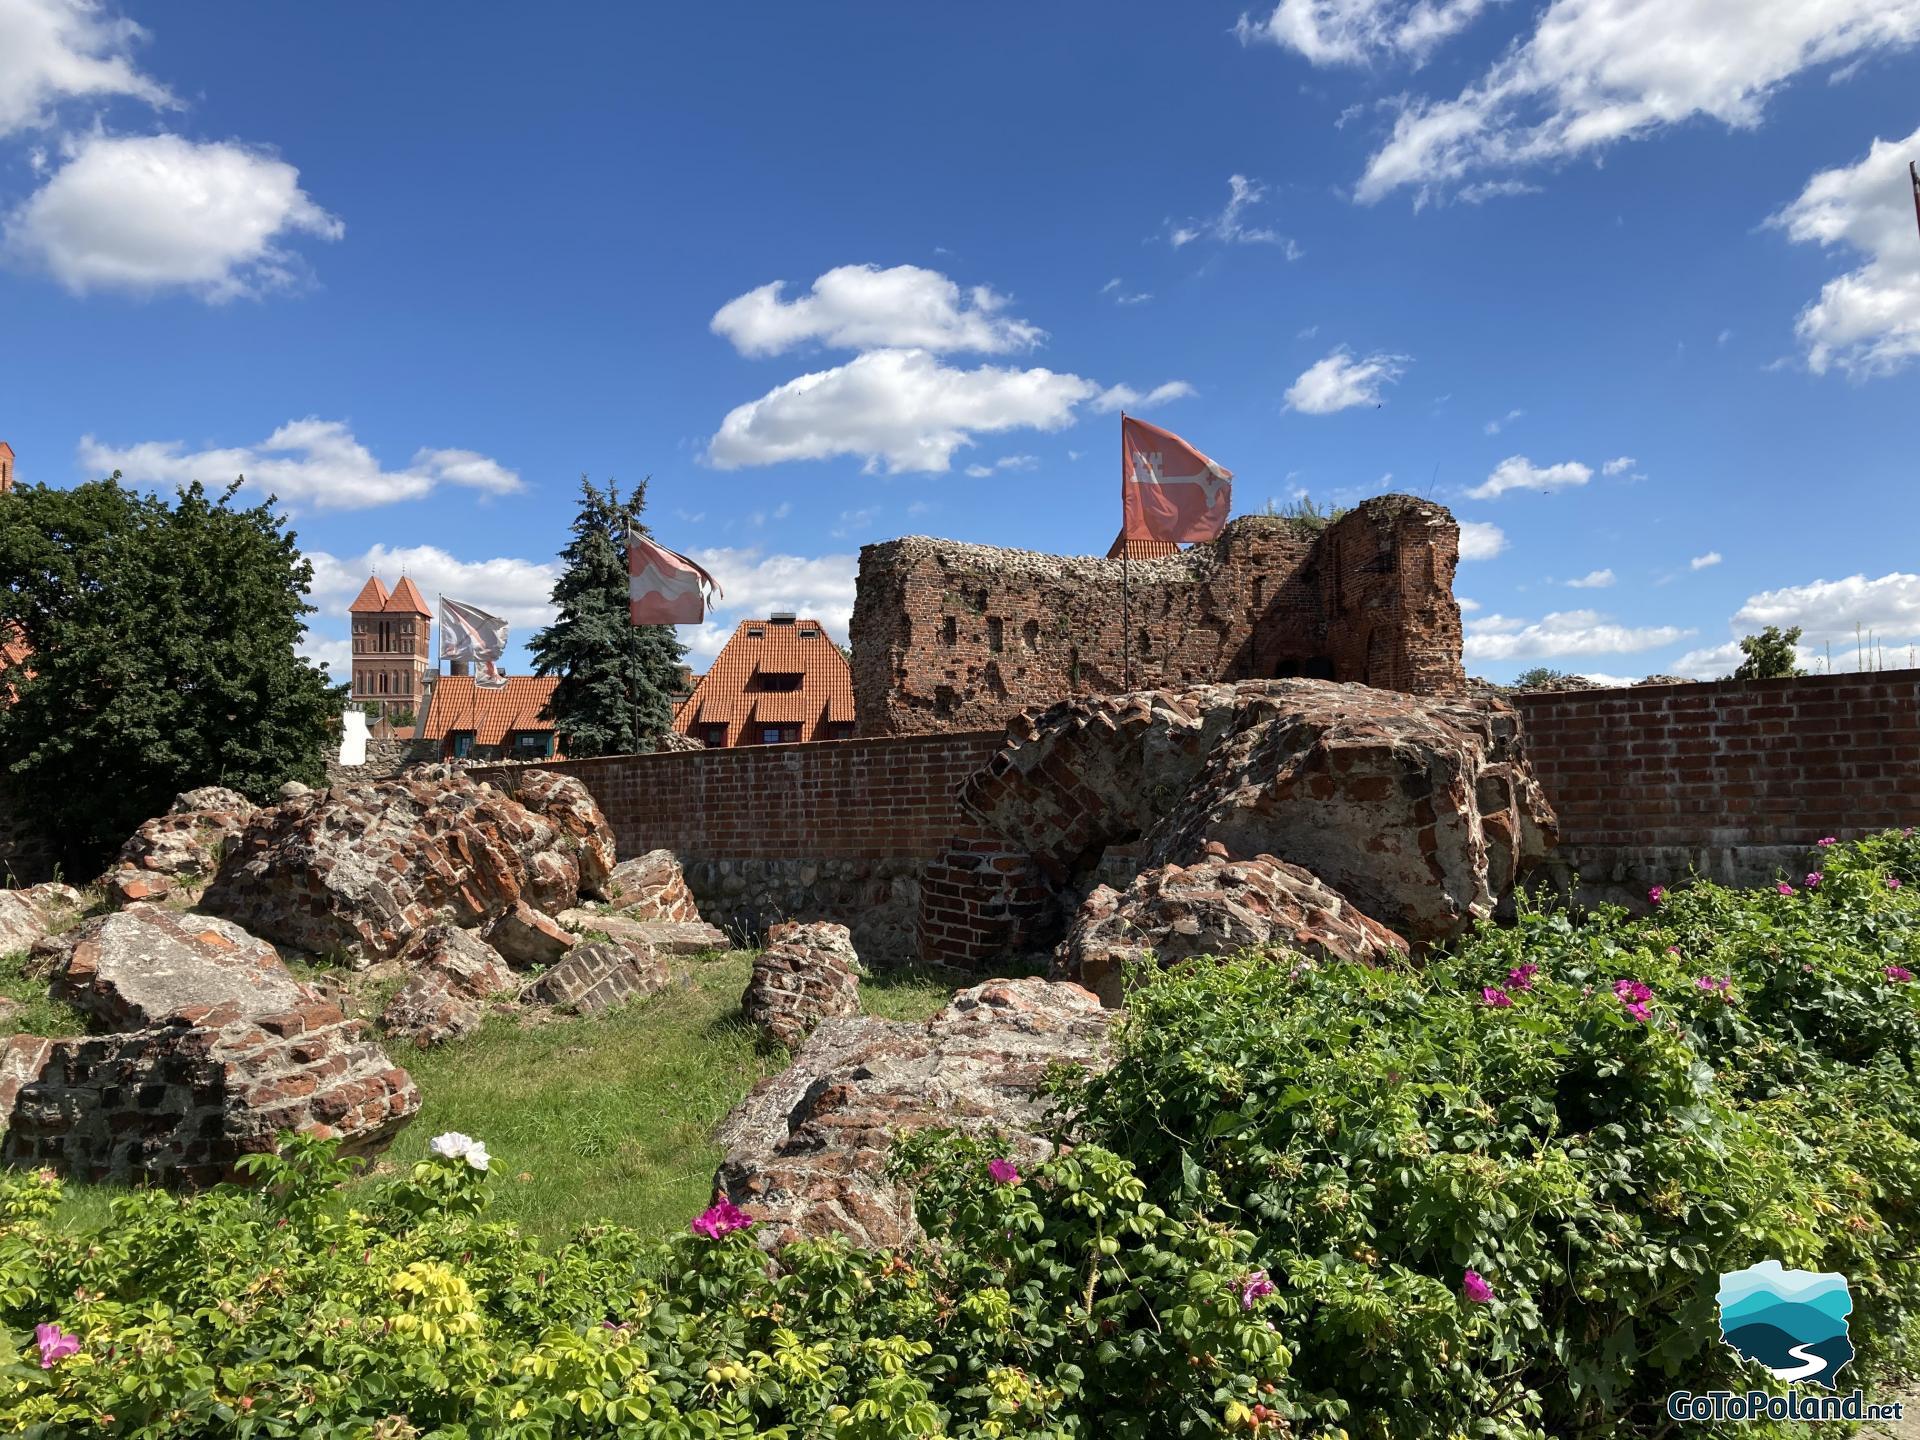 ruins of a former red brick castle, a wild rose grows around them, a church can be seen in the background